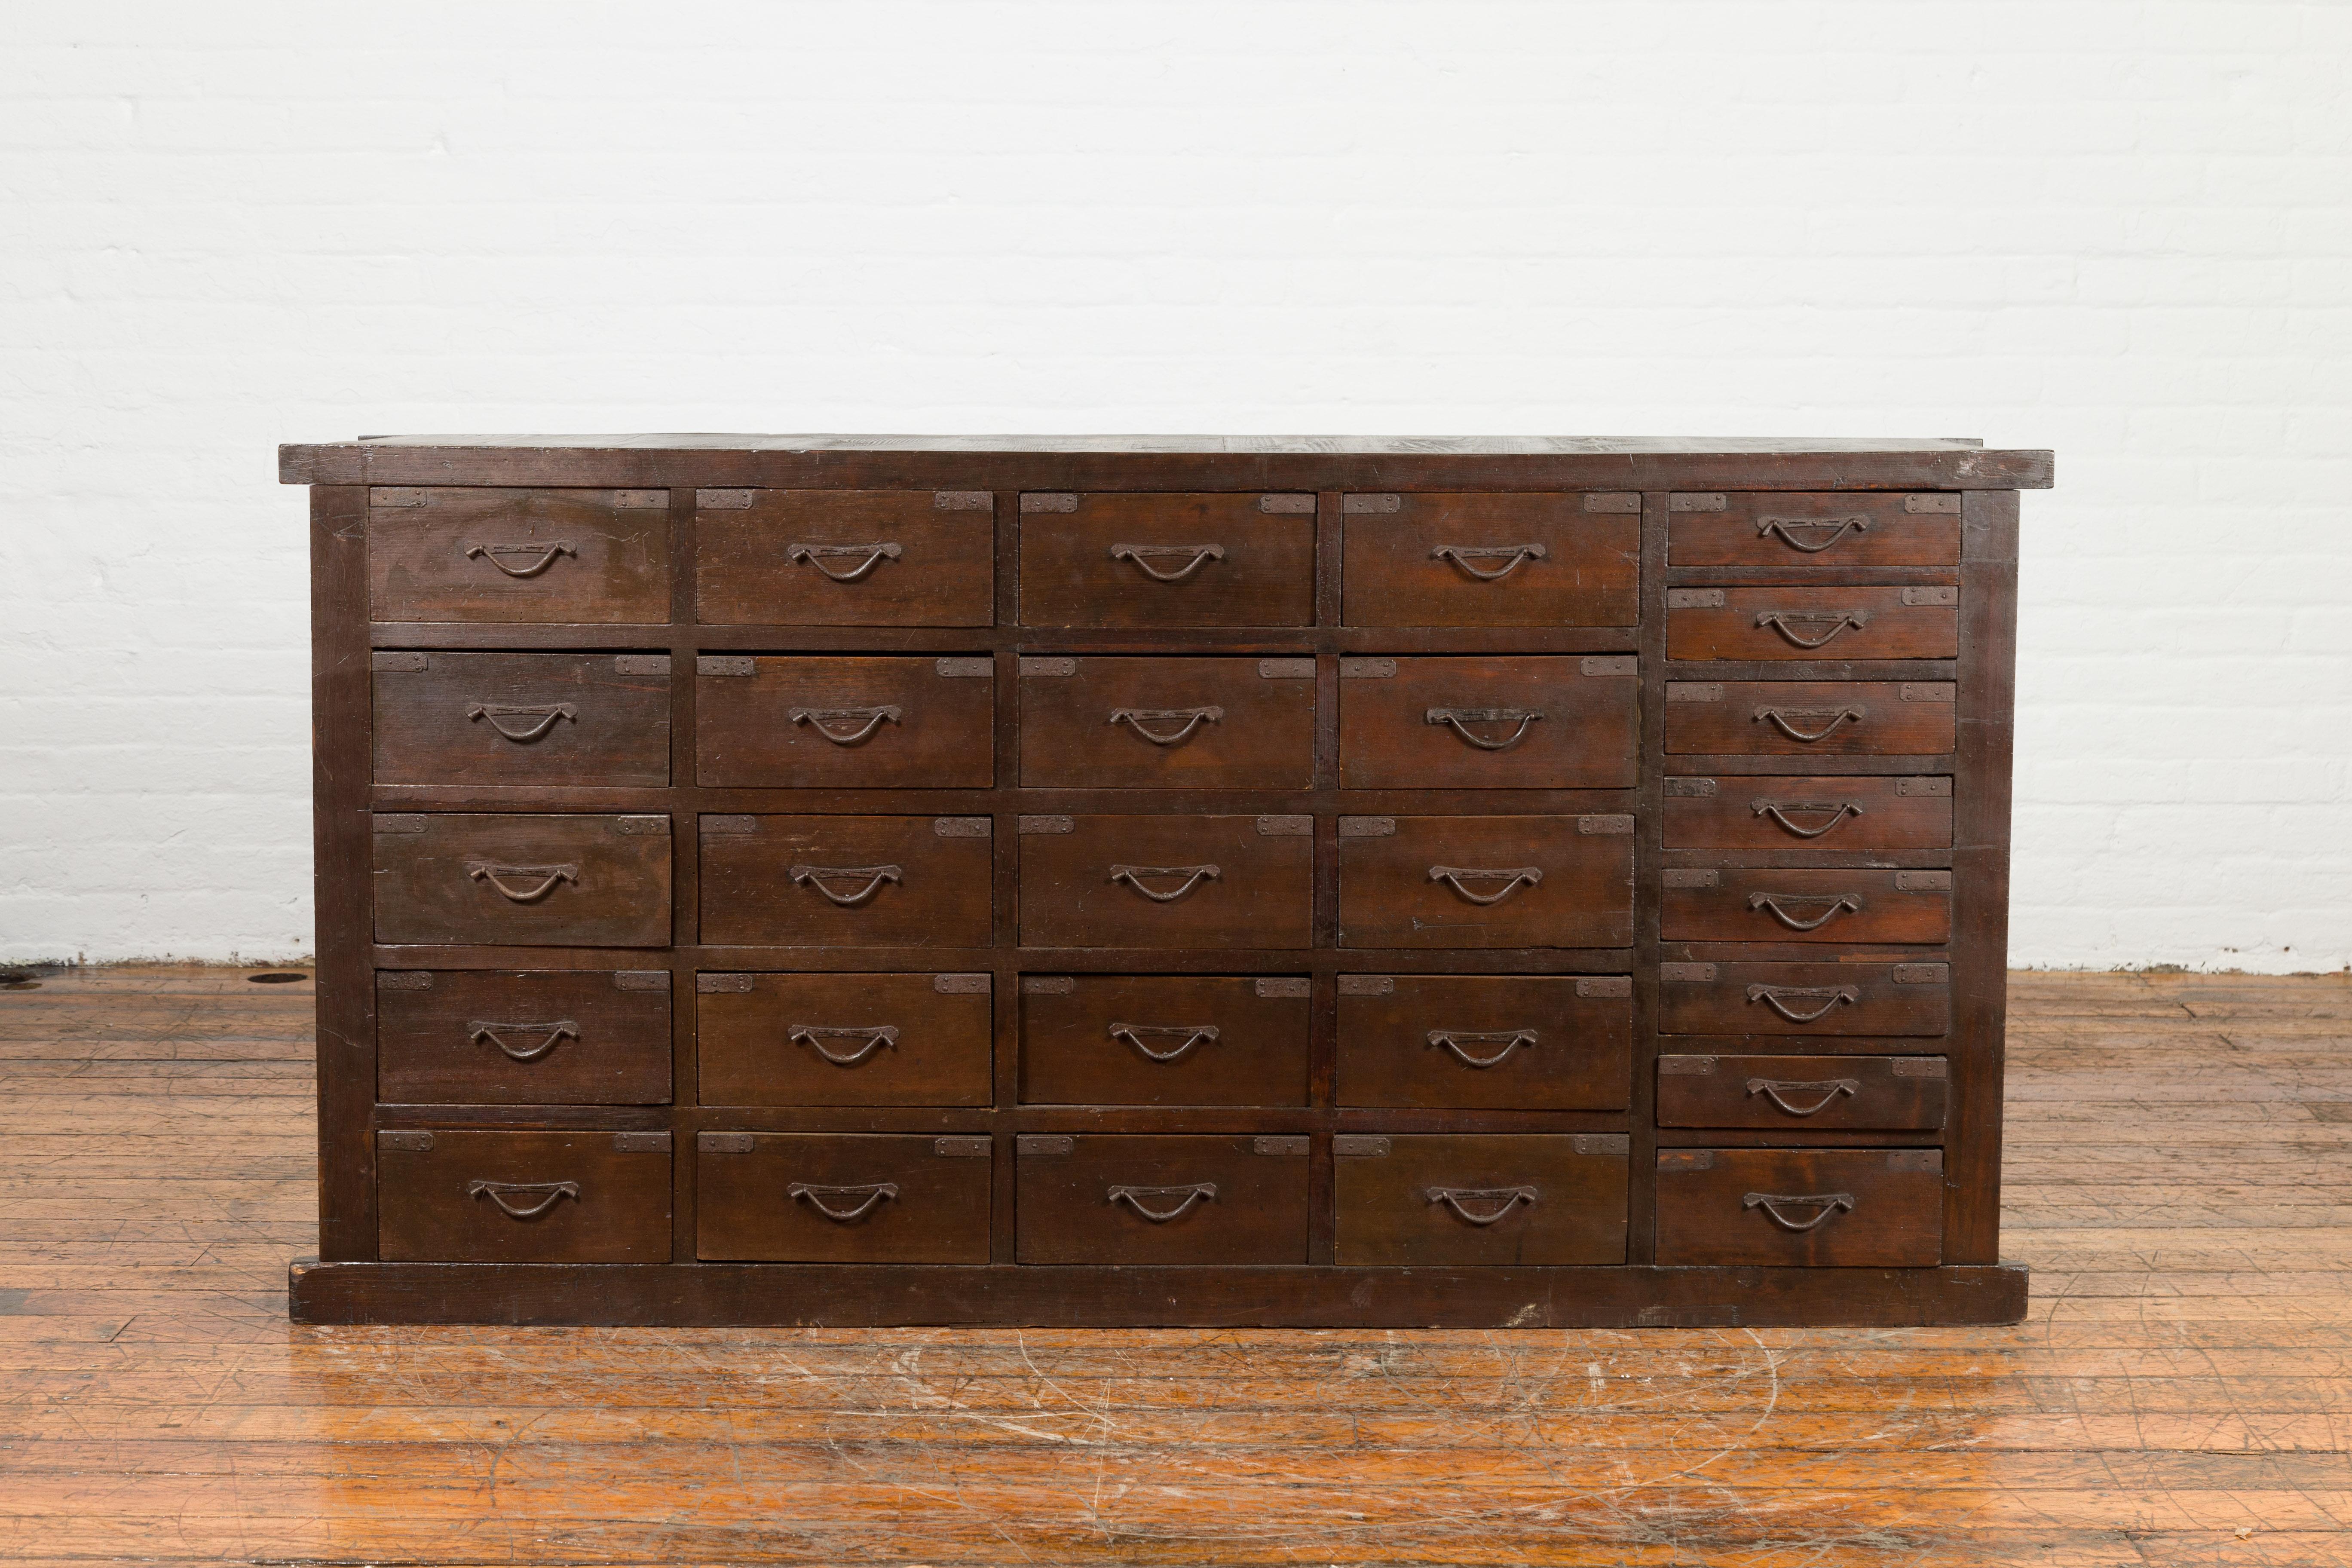 A large Japanese antique apothecary chest from the early 20th century, with 28 drawers and brown patina. Created in Japan during the early years of the 20th century, this apothecary chest features a rectangular top sitting above a perfectly